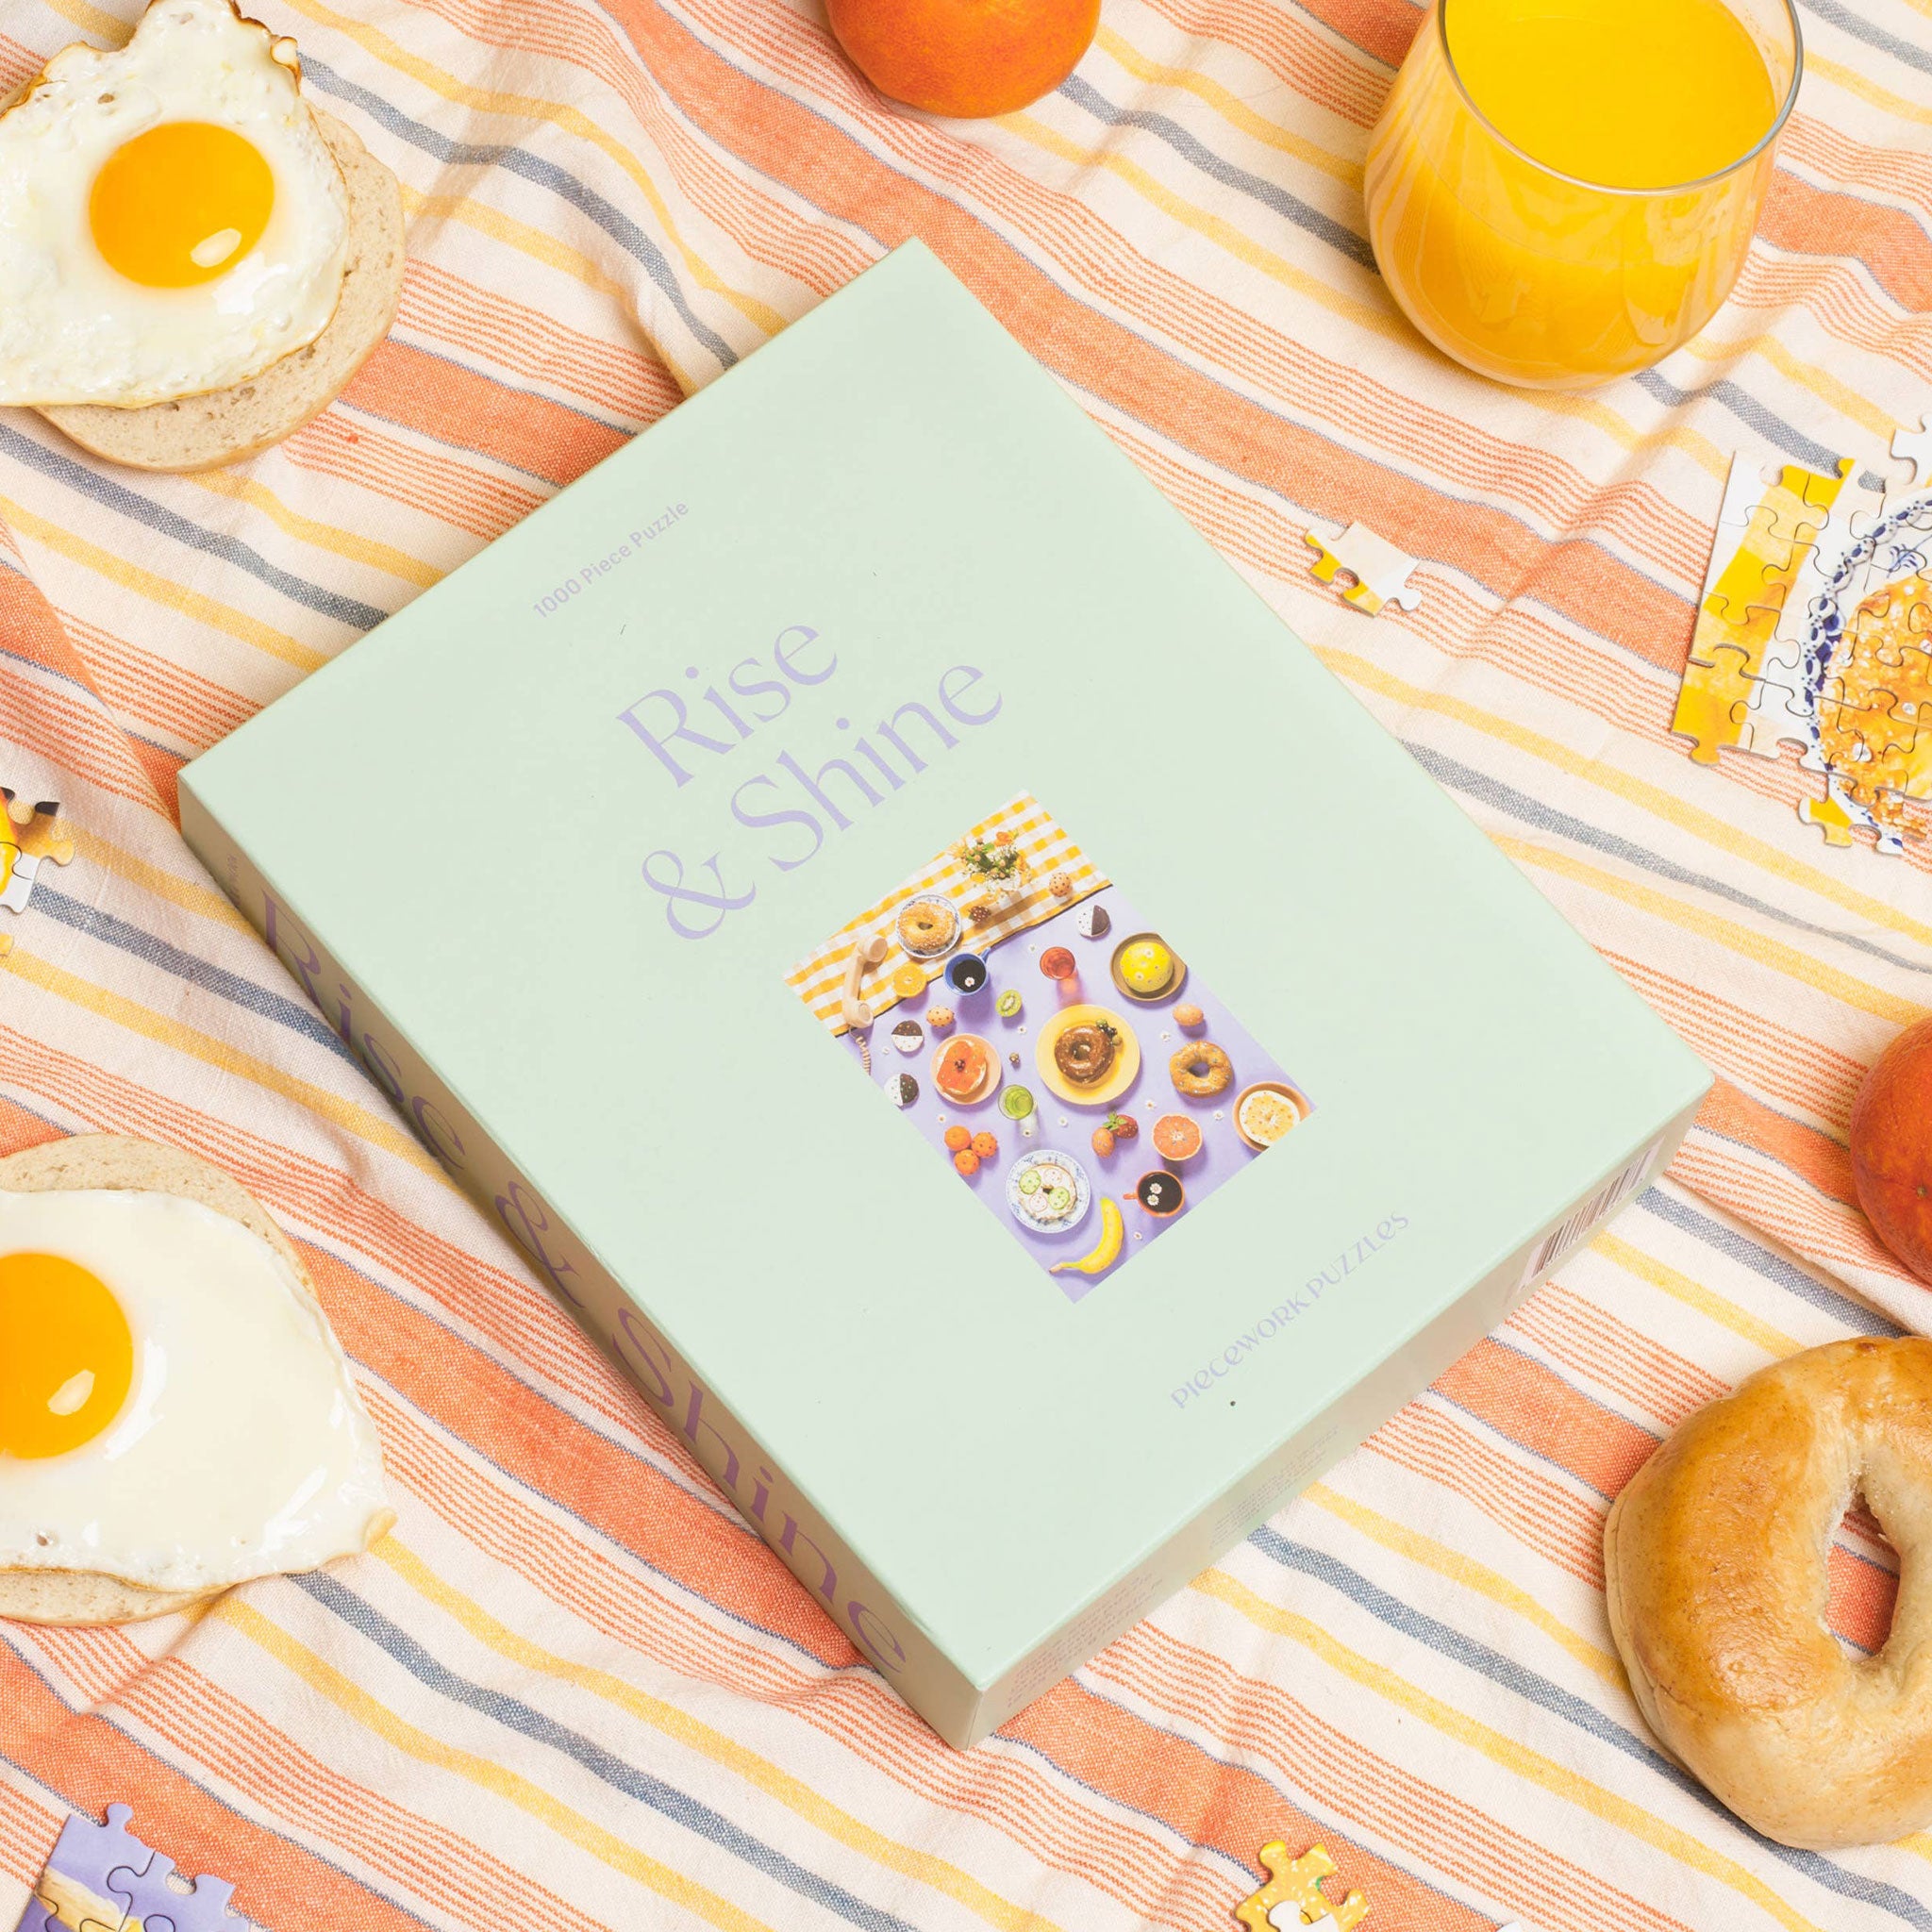 A mint green cardboard boxed puzzle with the words "Rise & Shine" in a light purple text along with an image of an array of bedazzled breakfast items including bagels, fruits, sunny side up eggs and more.